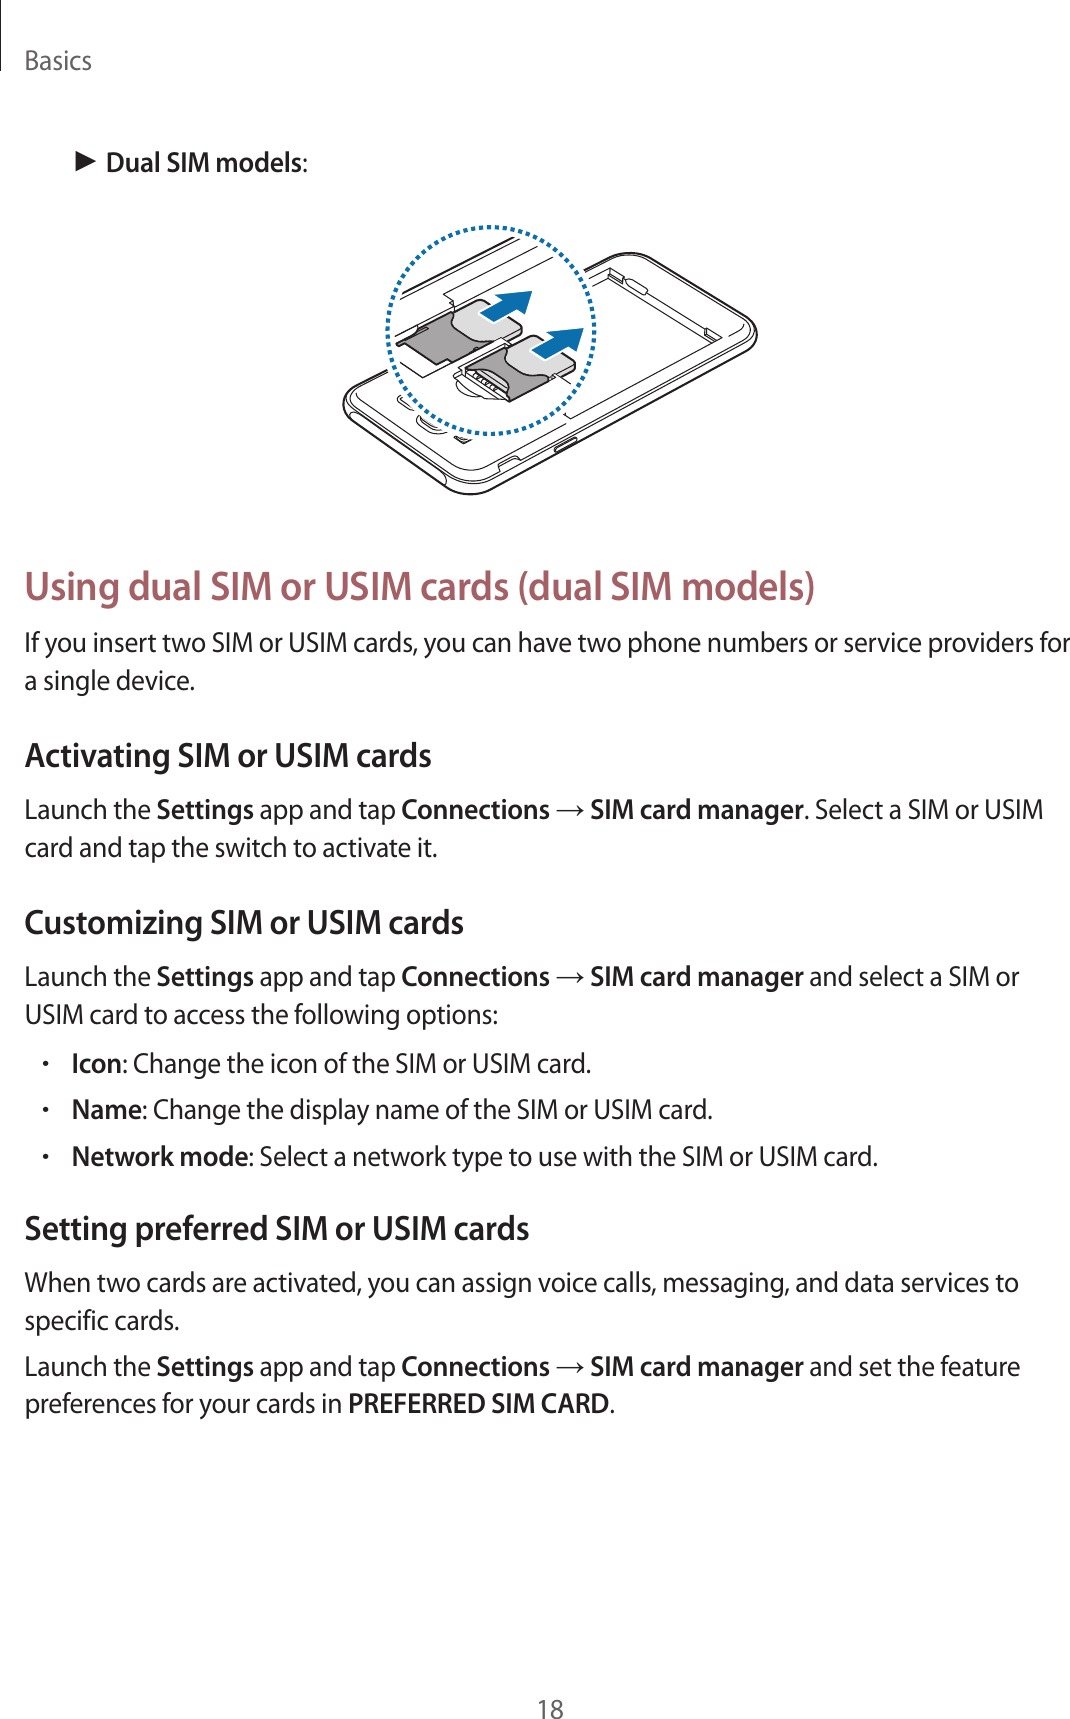 Basics18► Dual SIM models:Using dual SIM or USIM cards (dual SIM models)If you insert two SIM or USIM cards, you can have two phone numbers or service providers for a single device.Activating SIM or USIM cardsLaunch the Settings app and tap Connections → SIM card manager. Select a SIM or USIM card and tap the switch to activate it.Customizing SIM or USIM cardsLaunch the Settings app and tap Connections → SIM card manager and select a SIM or USIM card to access the following options:•Icon: Change the icon of the SIM or USIM card.•Name: Change the display name of the SIM or USIM card.•Network mode: Select a network type to use with the SIM or USIM card.Setting preferred SIM or USIM cardsWhen two cards are activated, you can assign voice calls, messaging, and data services to specific cards.Launch the Settings app and tap Connections → SIM card manager and set the feature preferences for your cards in PREFERRED SIM CARD.